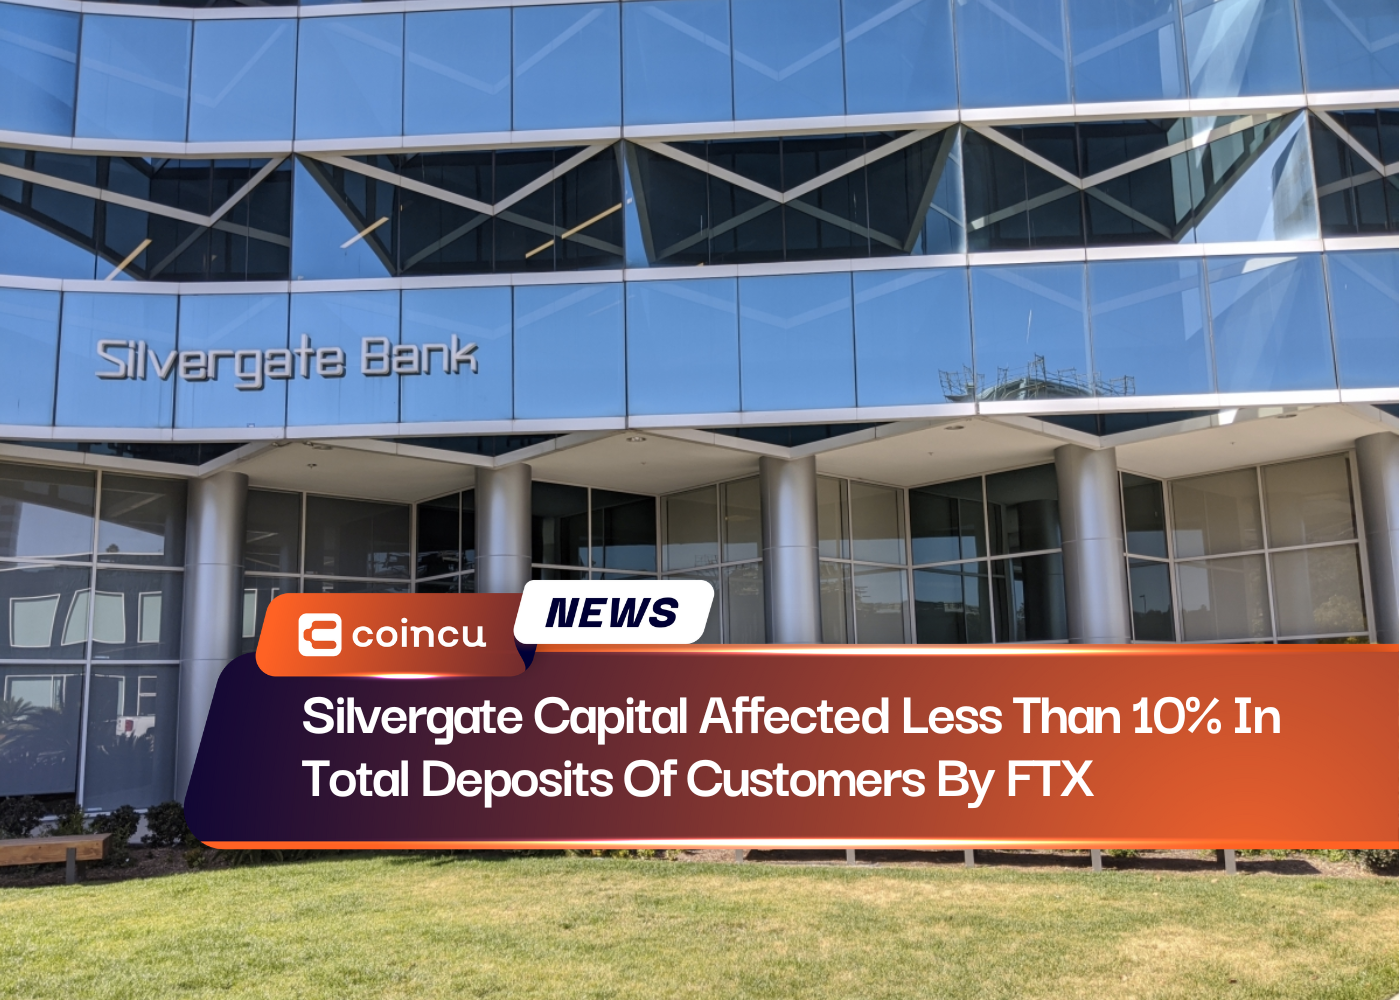 Silvergate Capital Affected Less Than 10% In Total Deposits Of Customers By FTX